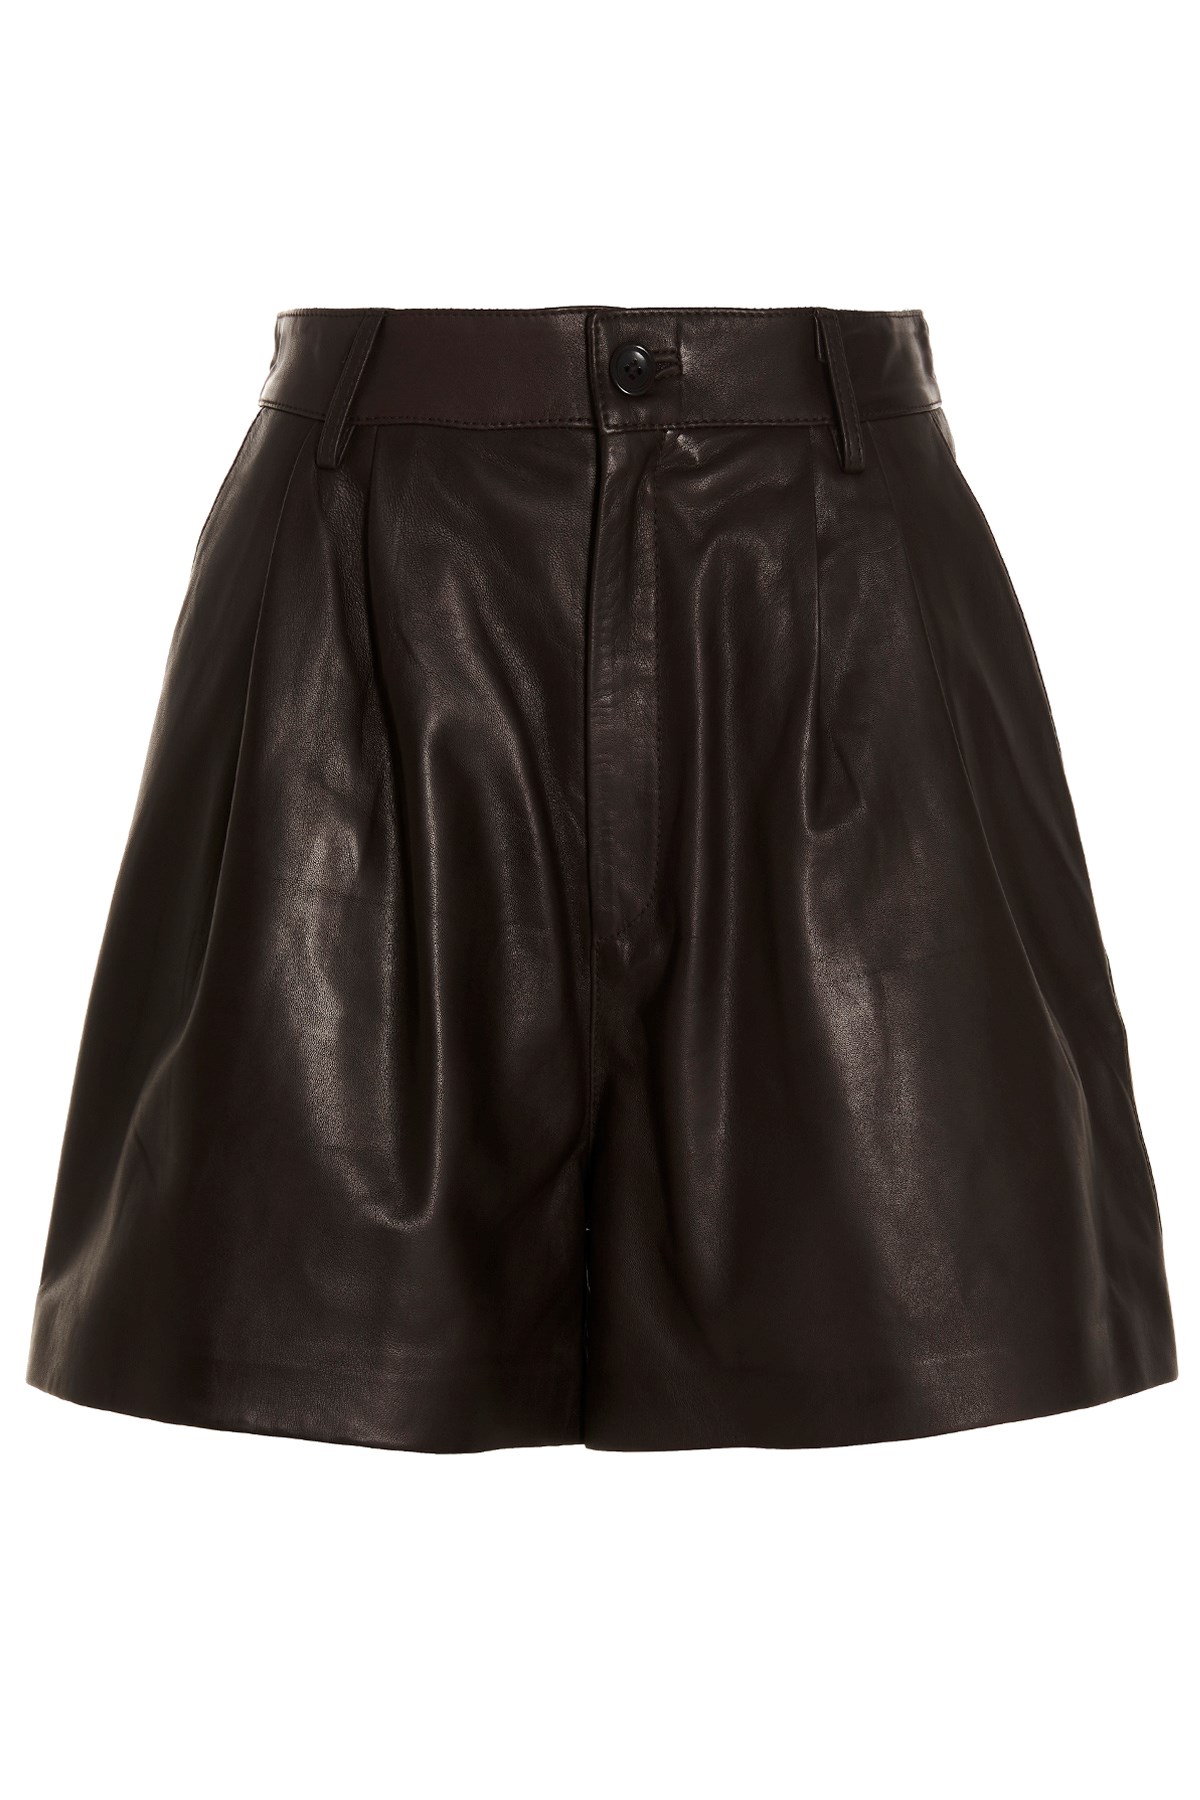 P.A.R.O.S.H. Leather Shorts